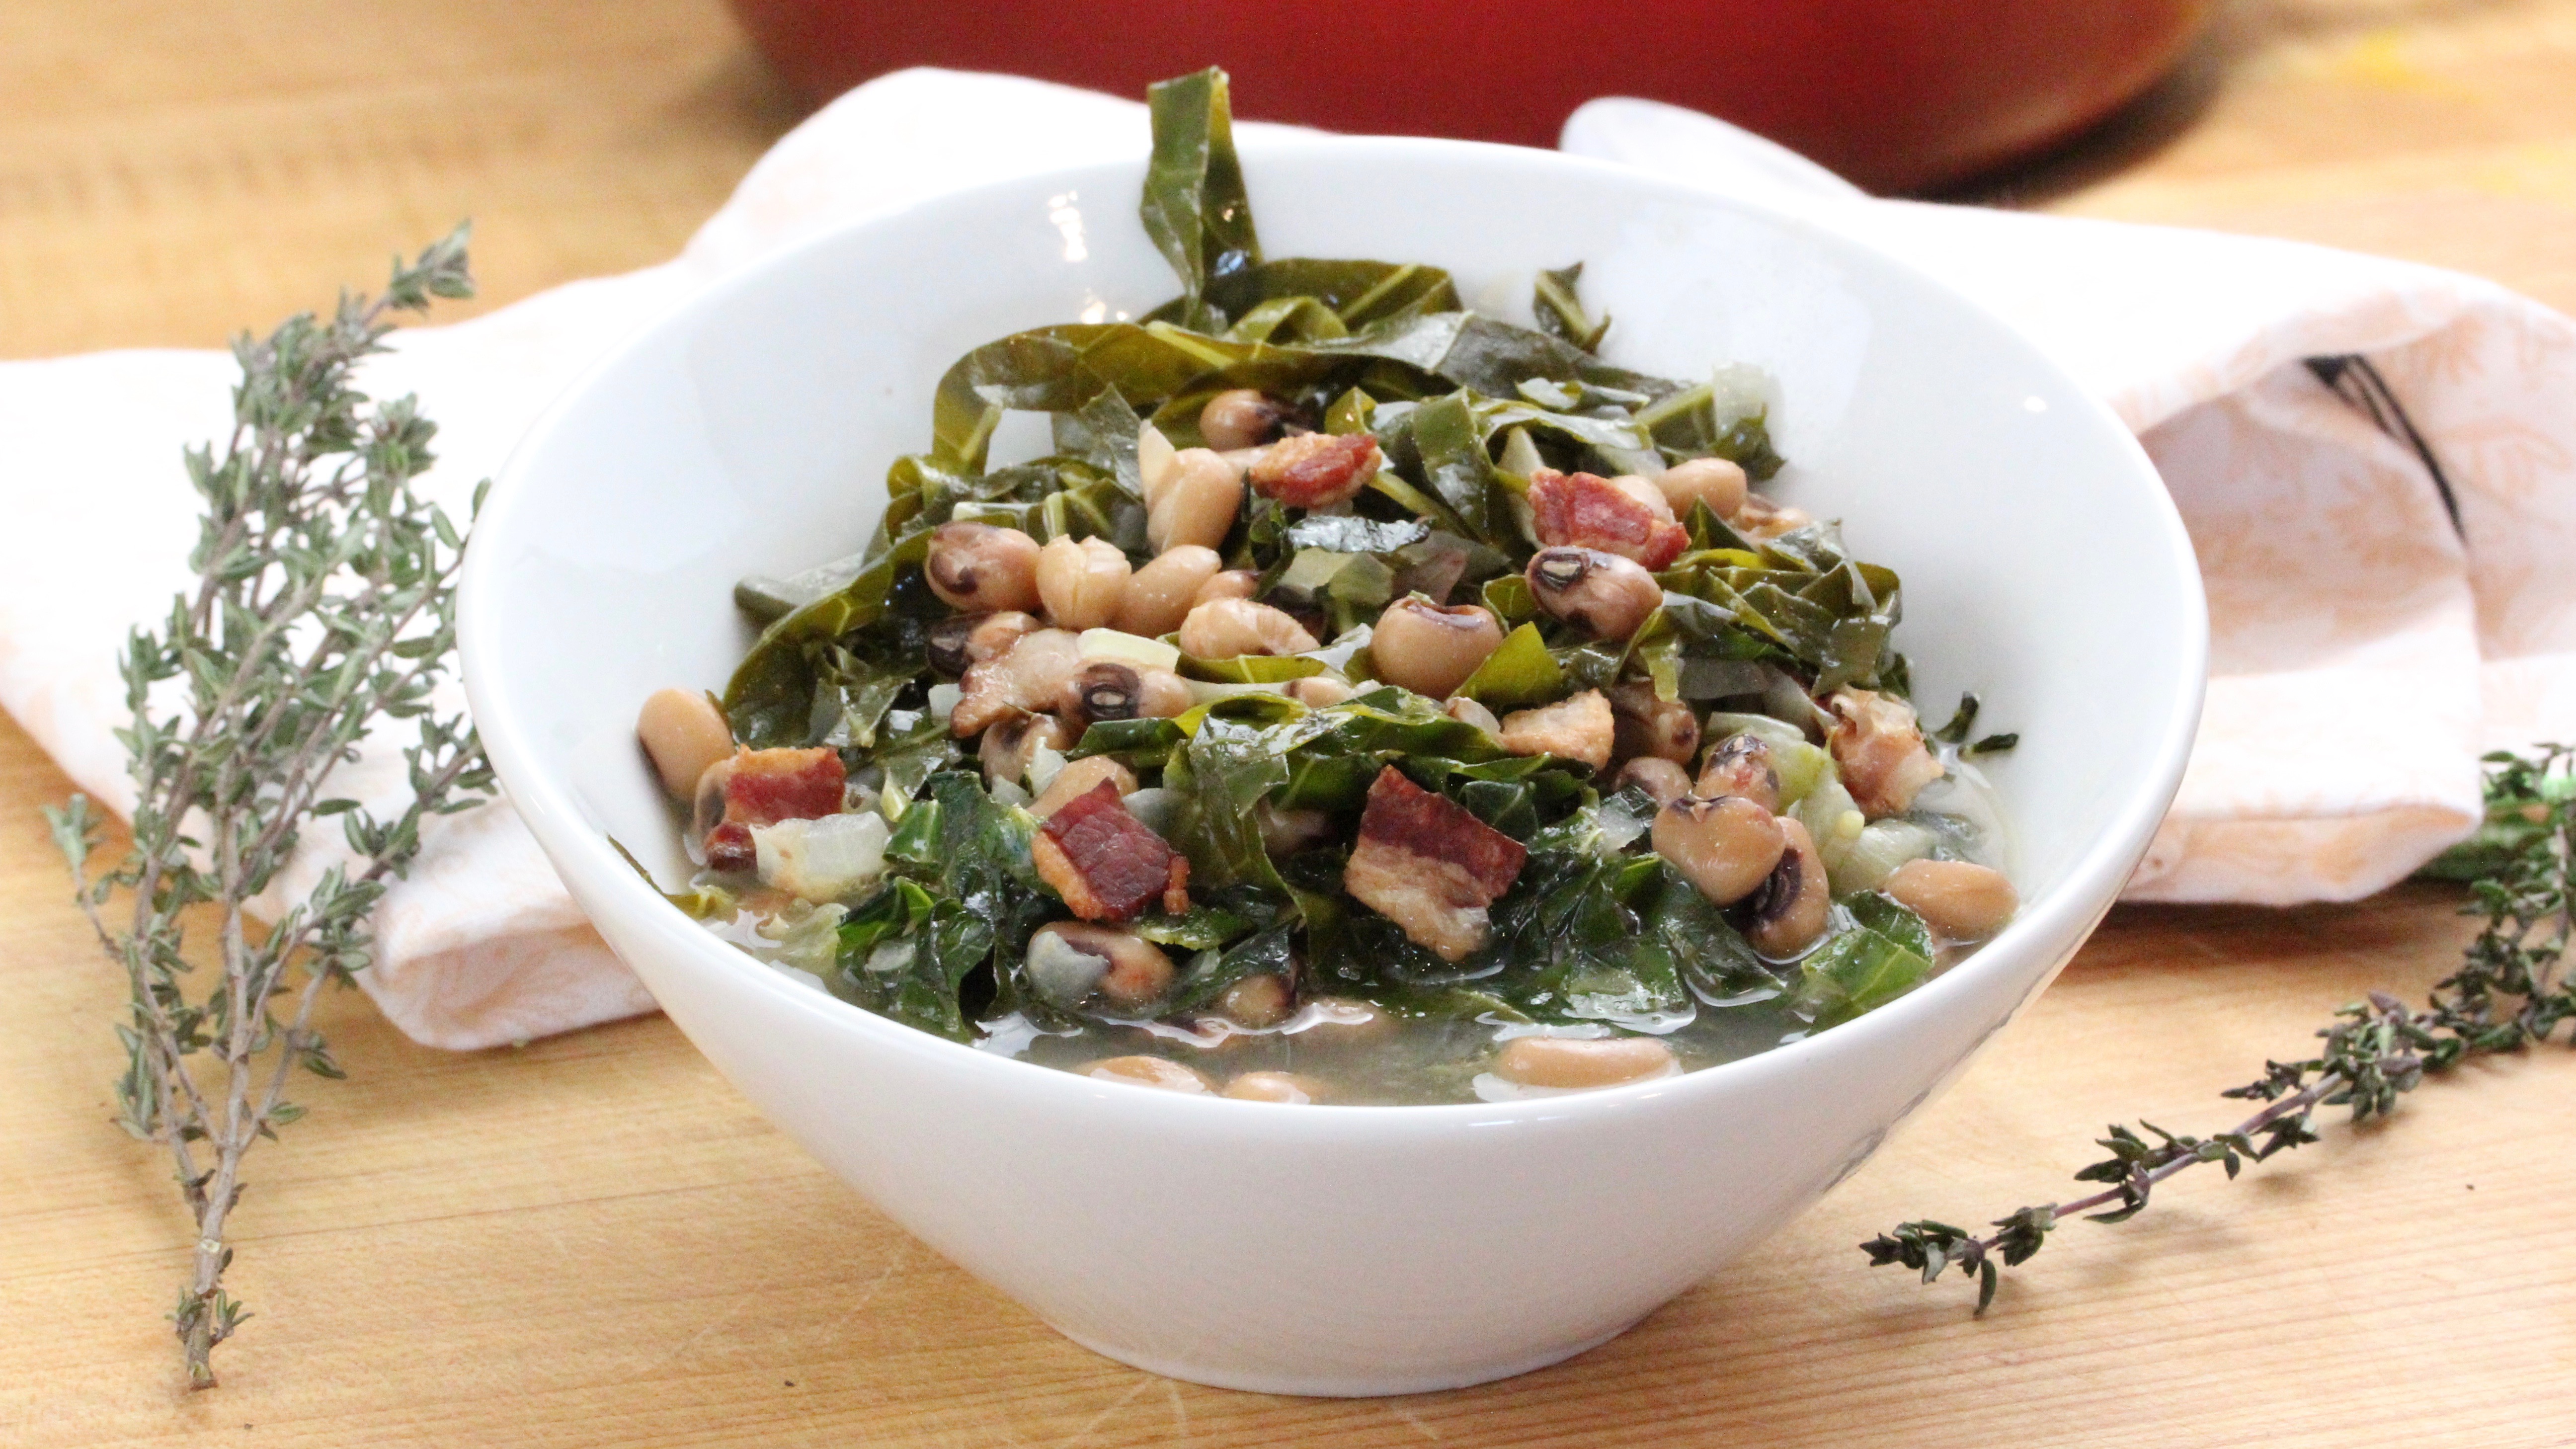 Black Eyed Peas & Collard Greens - Clean & Delicious with Dani Spies